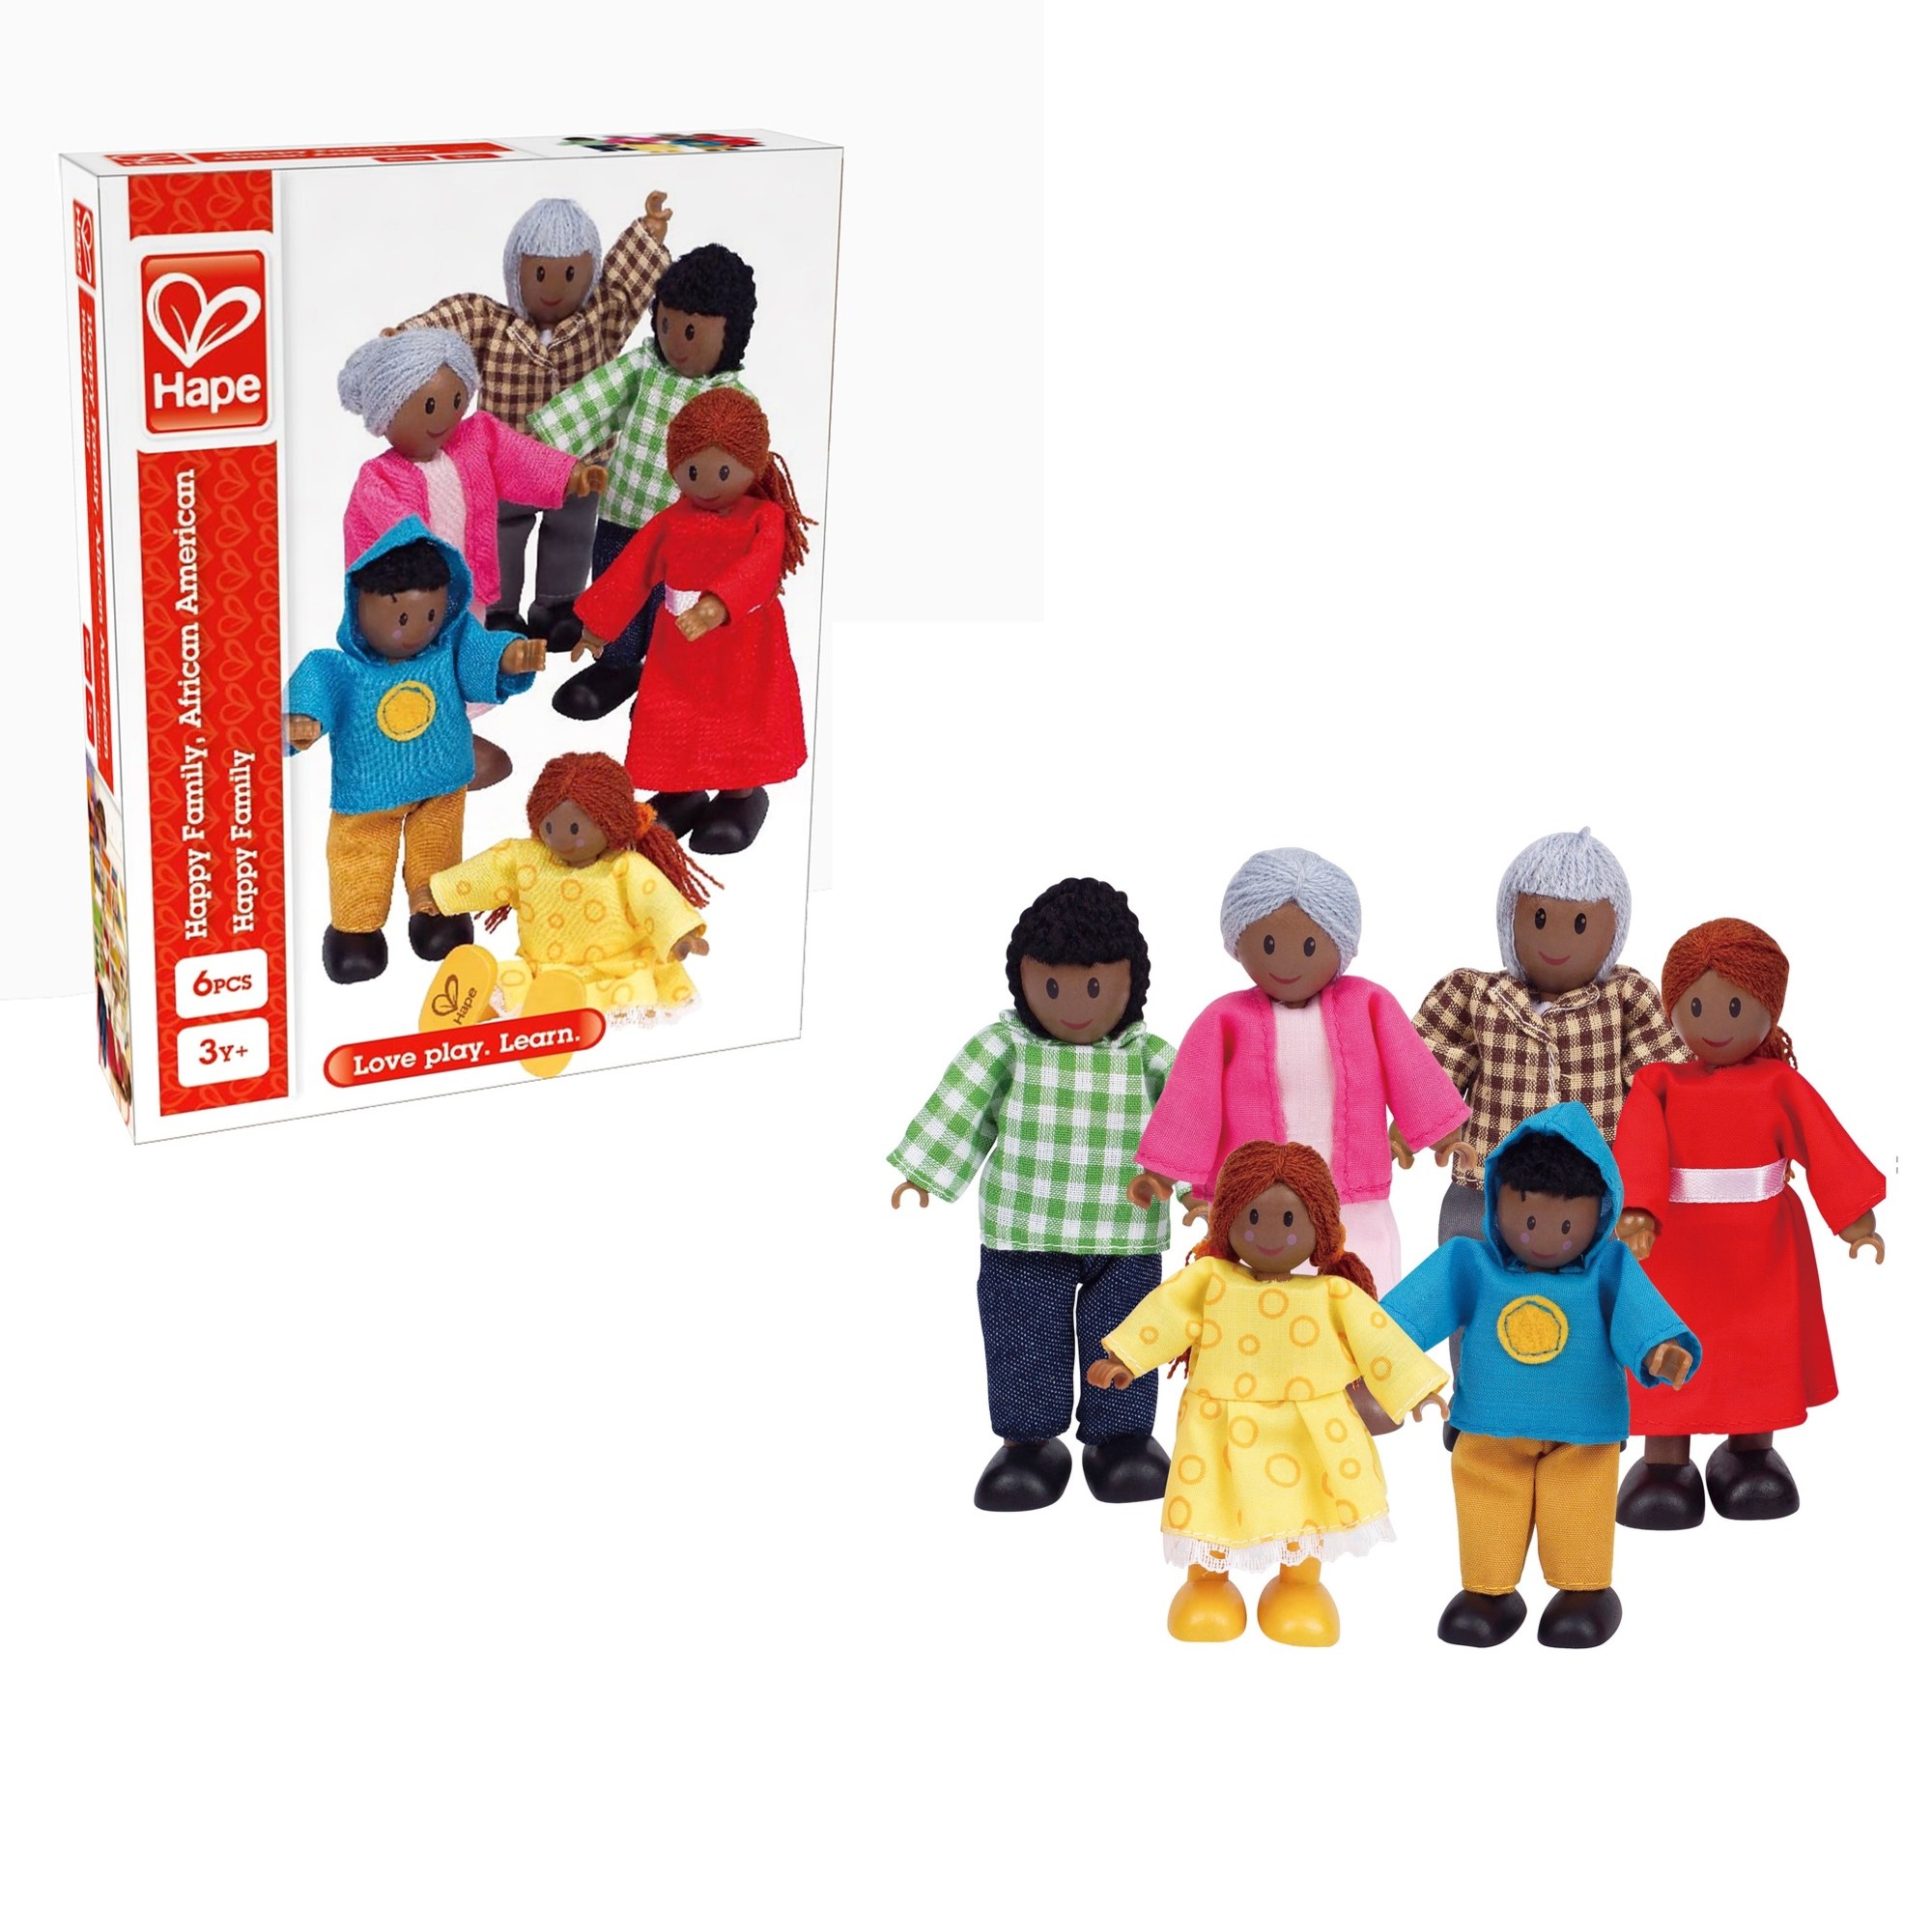 Hape African American Happy Family Dollhouse Set with 6 Dolls - image 5 of 5